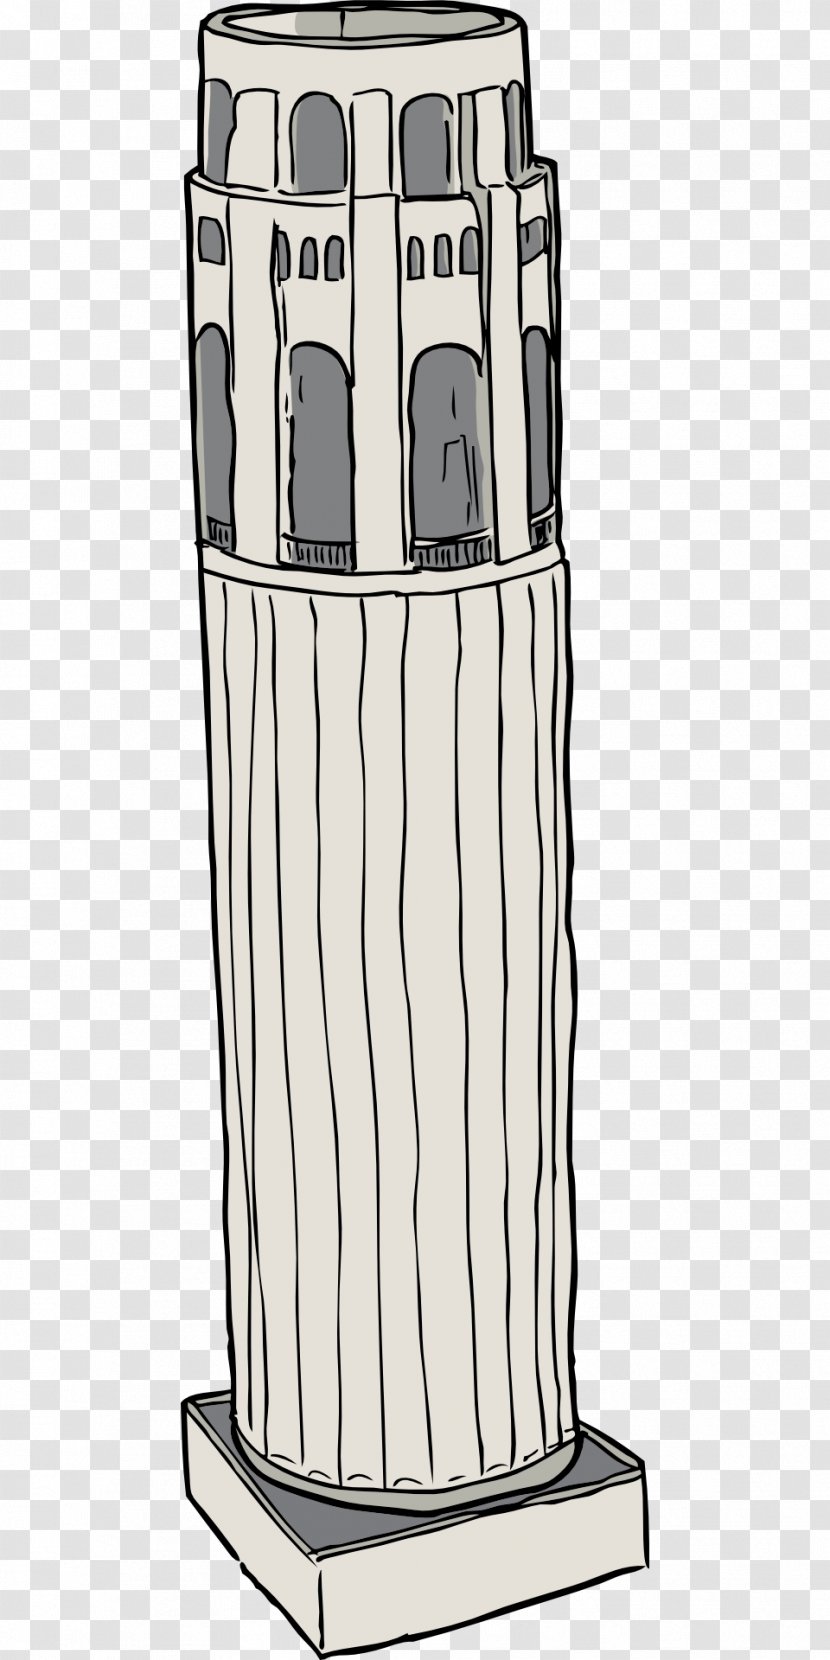 Coit Tower Vector Graphics Image Illustration - Building Transparent PNG